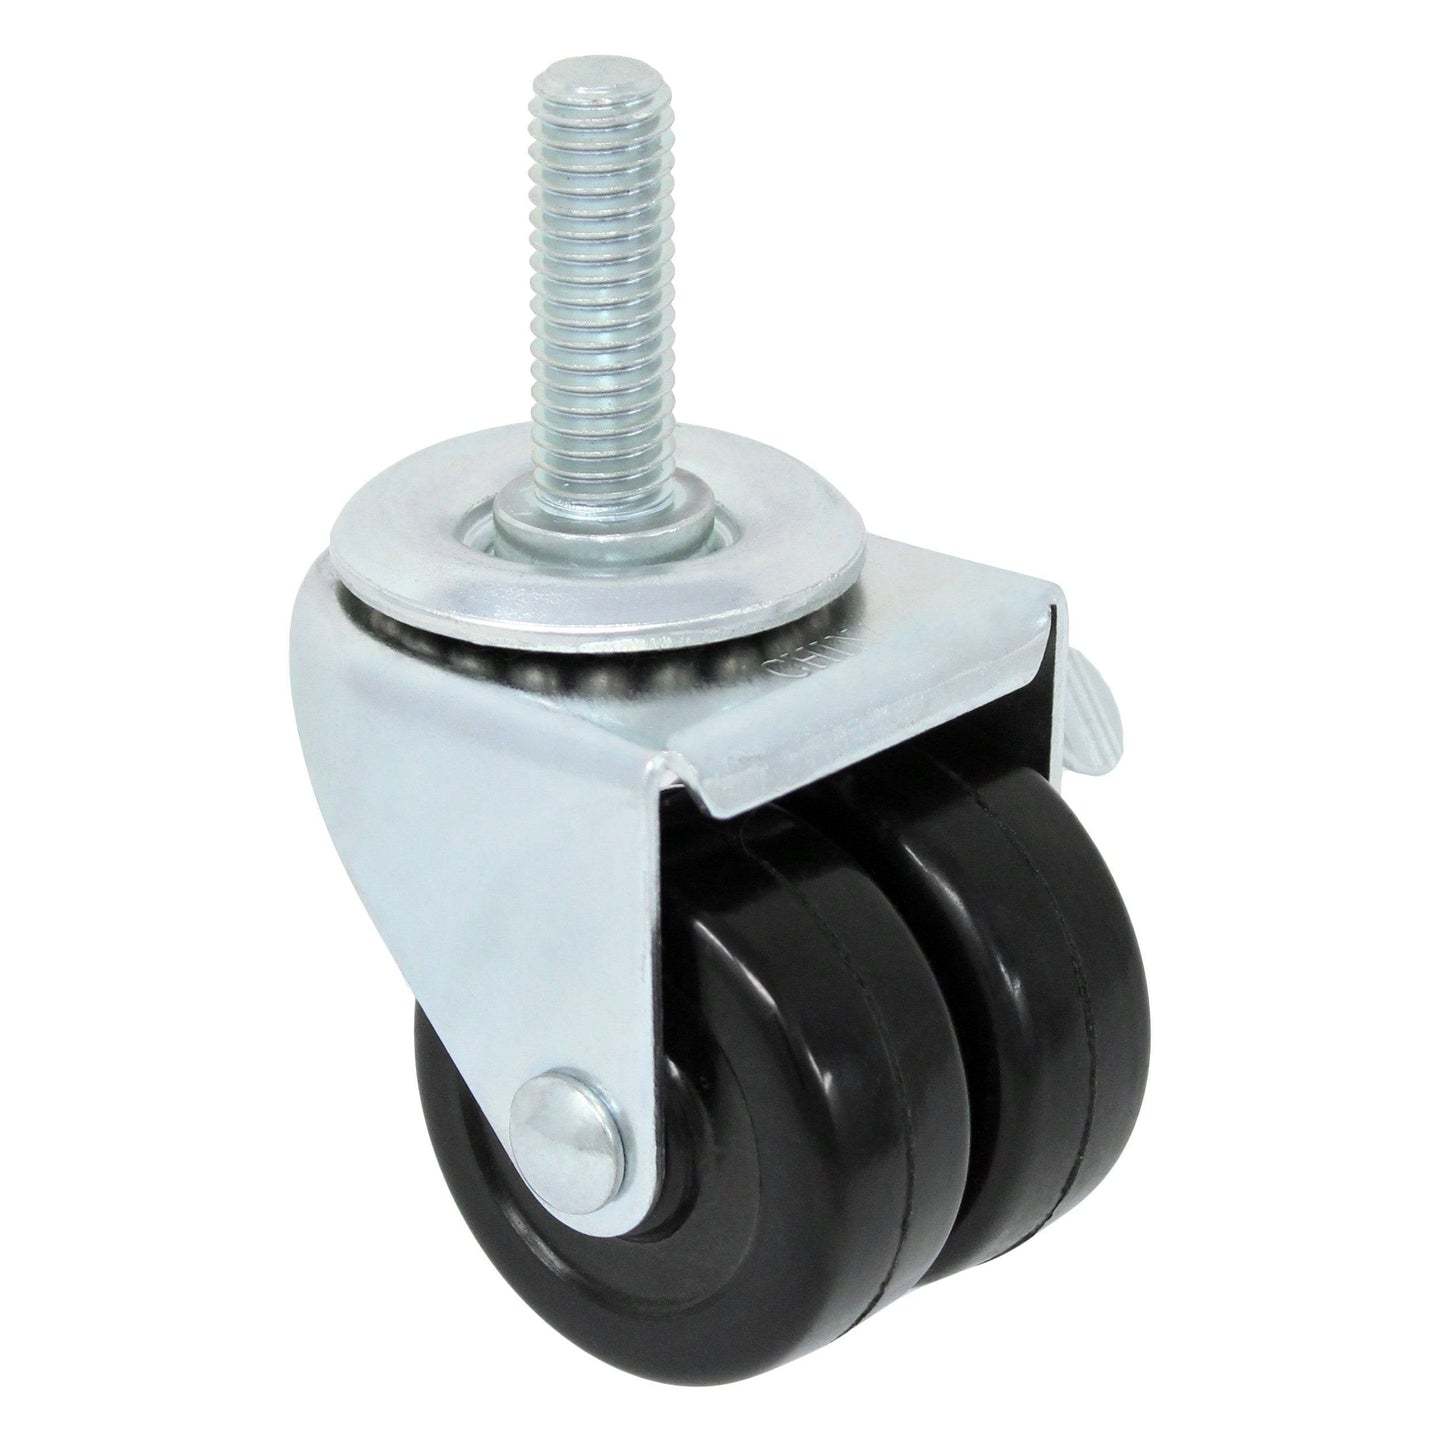 2" Double Wheel Hard Rubber Threaded Swivel Stem Caster - 200 lbs. Capacity (4-Pack) - Durable Superior Casters